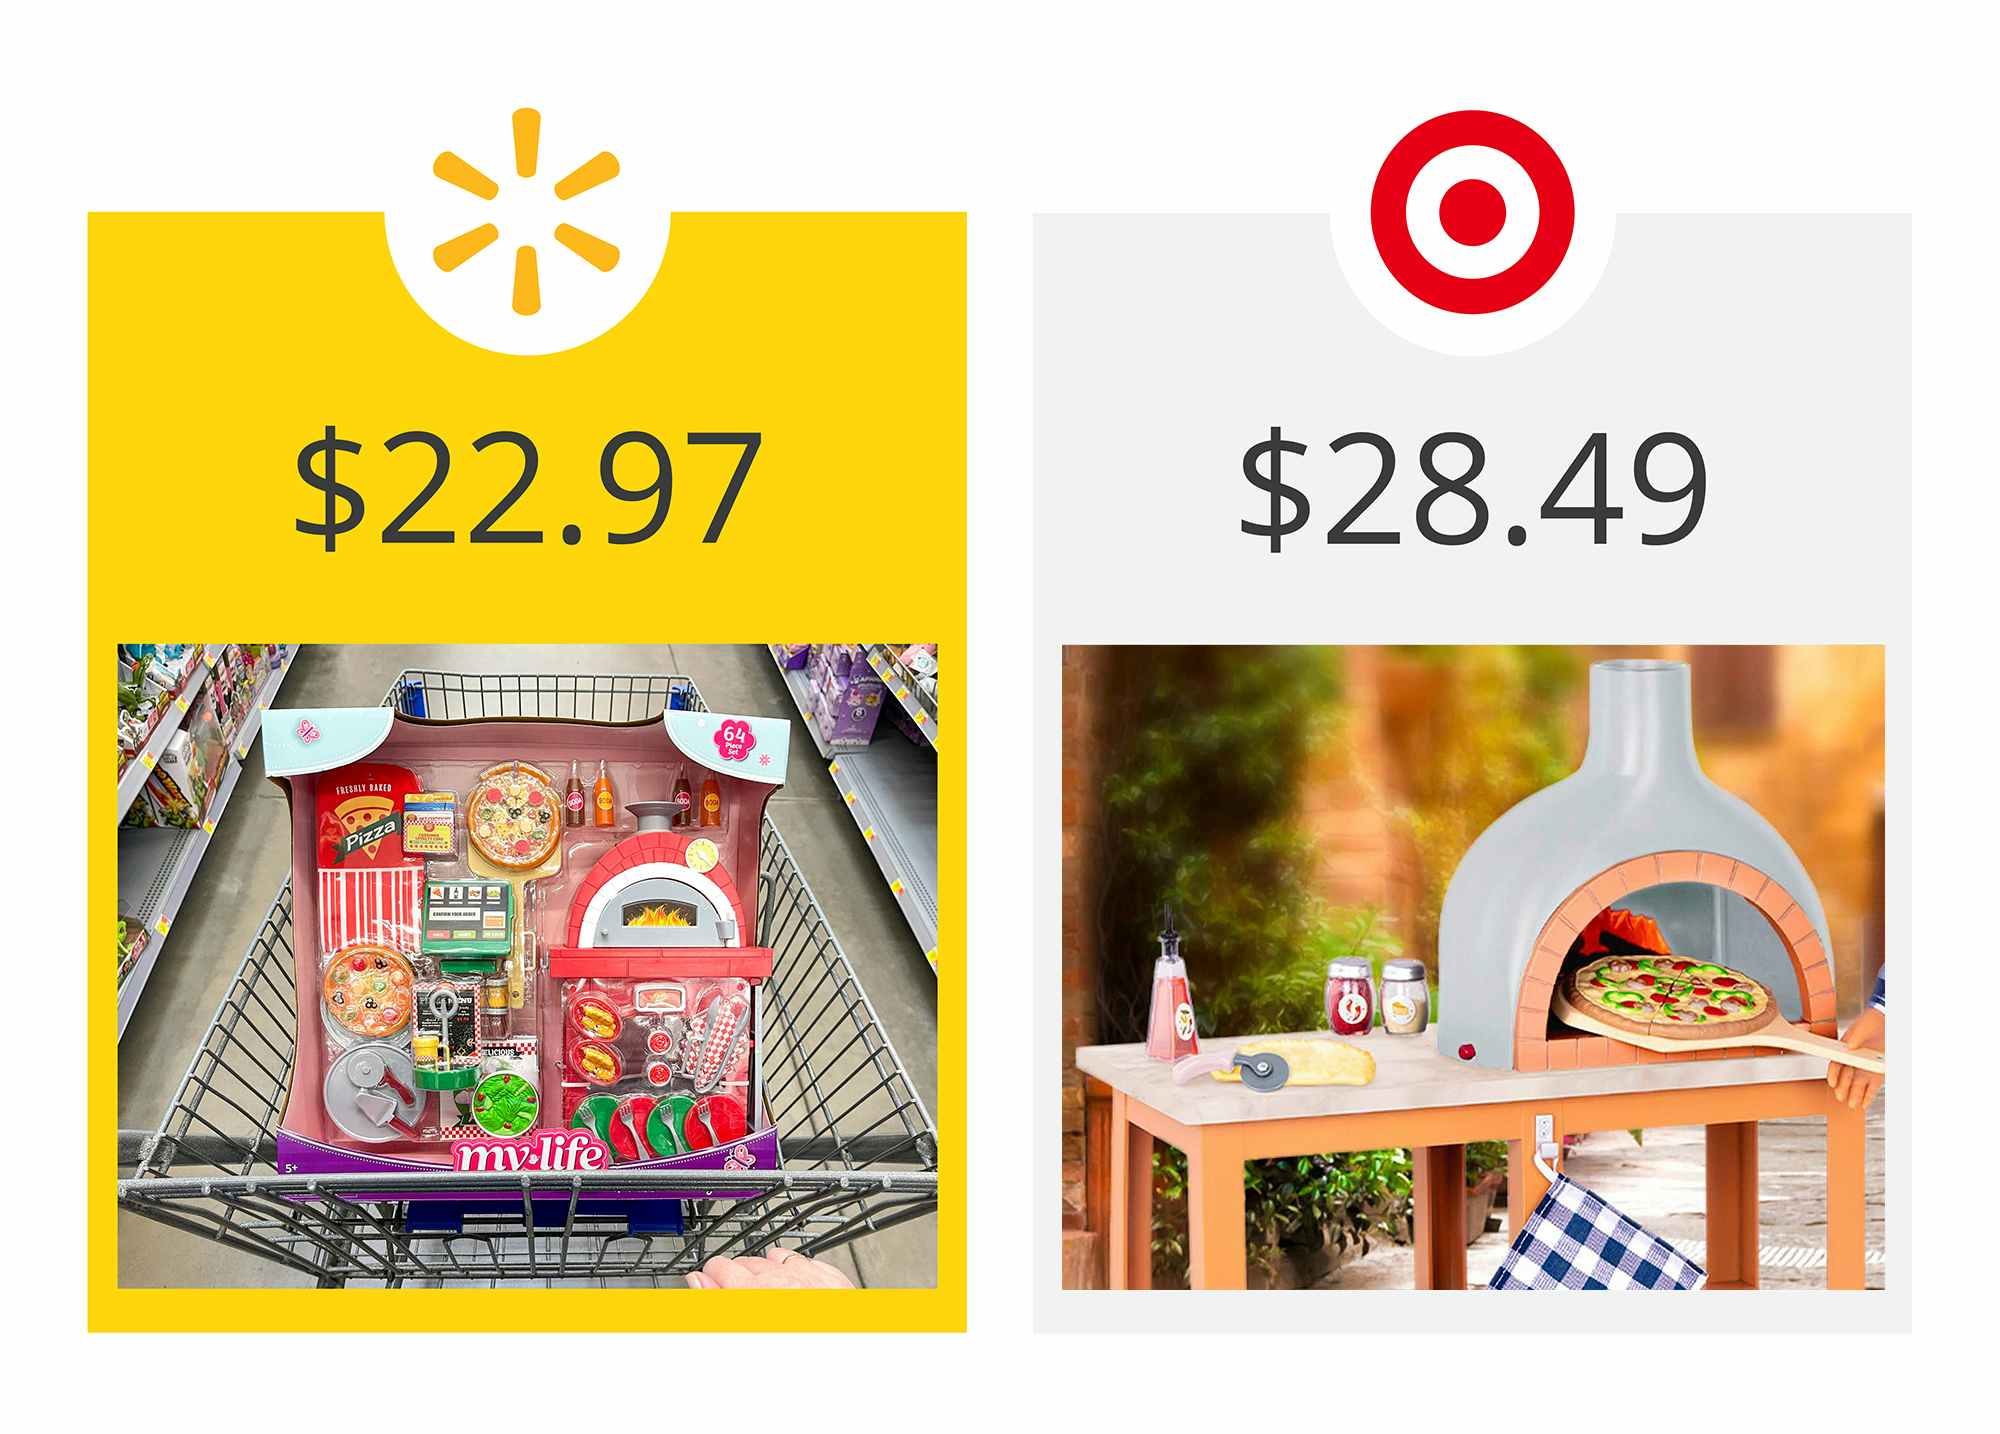 walmart as the winner on a graphic showing price comparison between target's our generation and walmart's my life as doll pizza sets